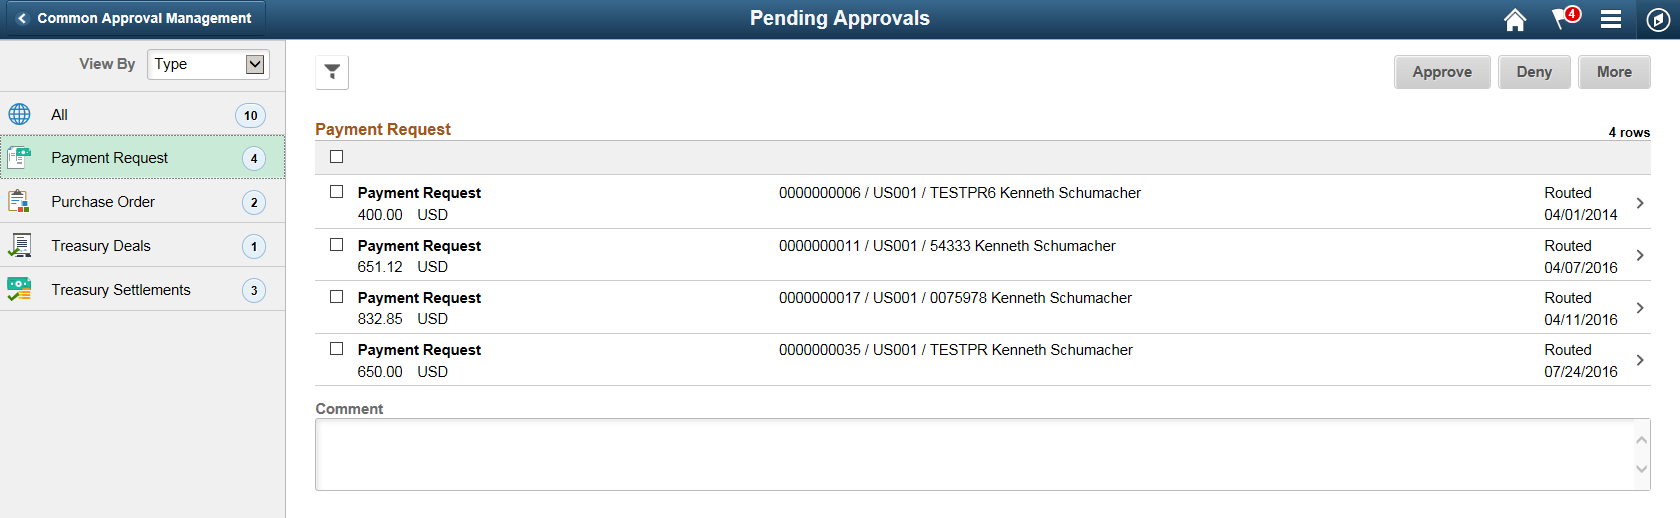 Pending Approvals PR Page